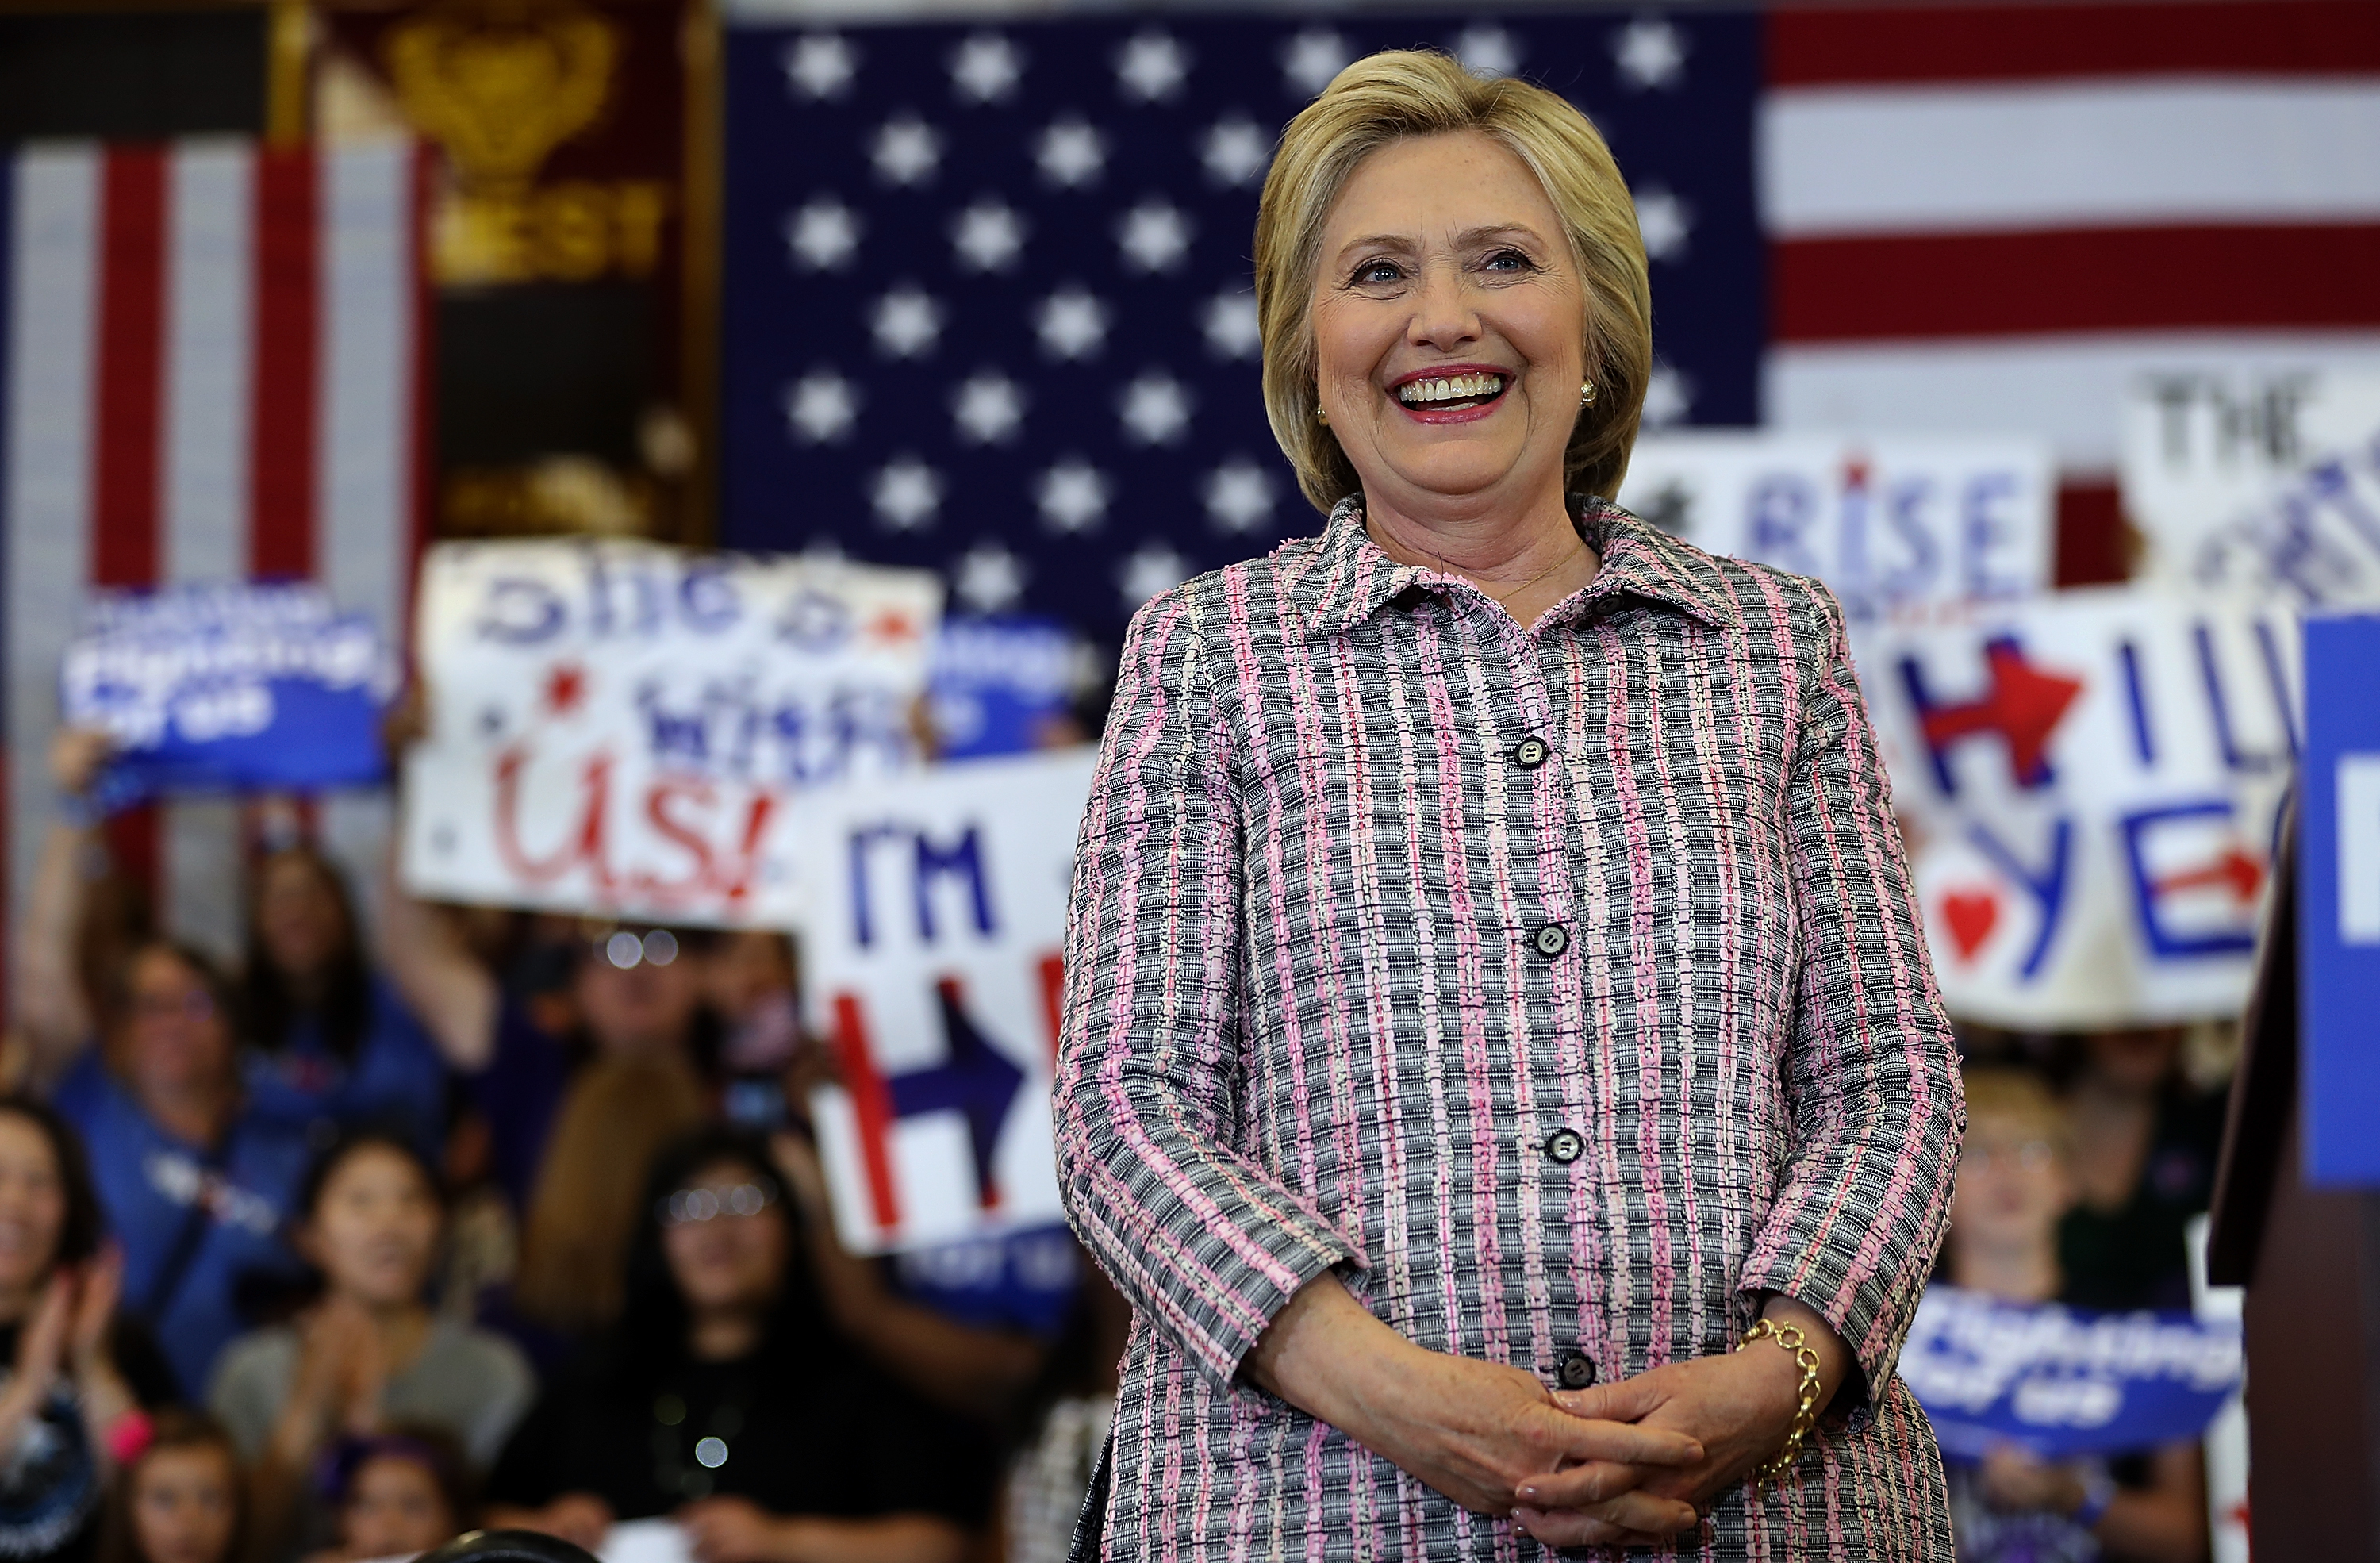 Hillary Clinton Campaigns In California's Bay Area Ahead Of State Primary